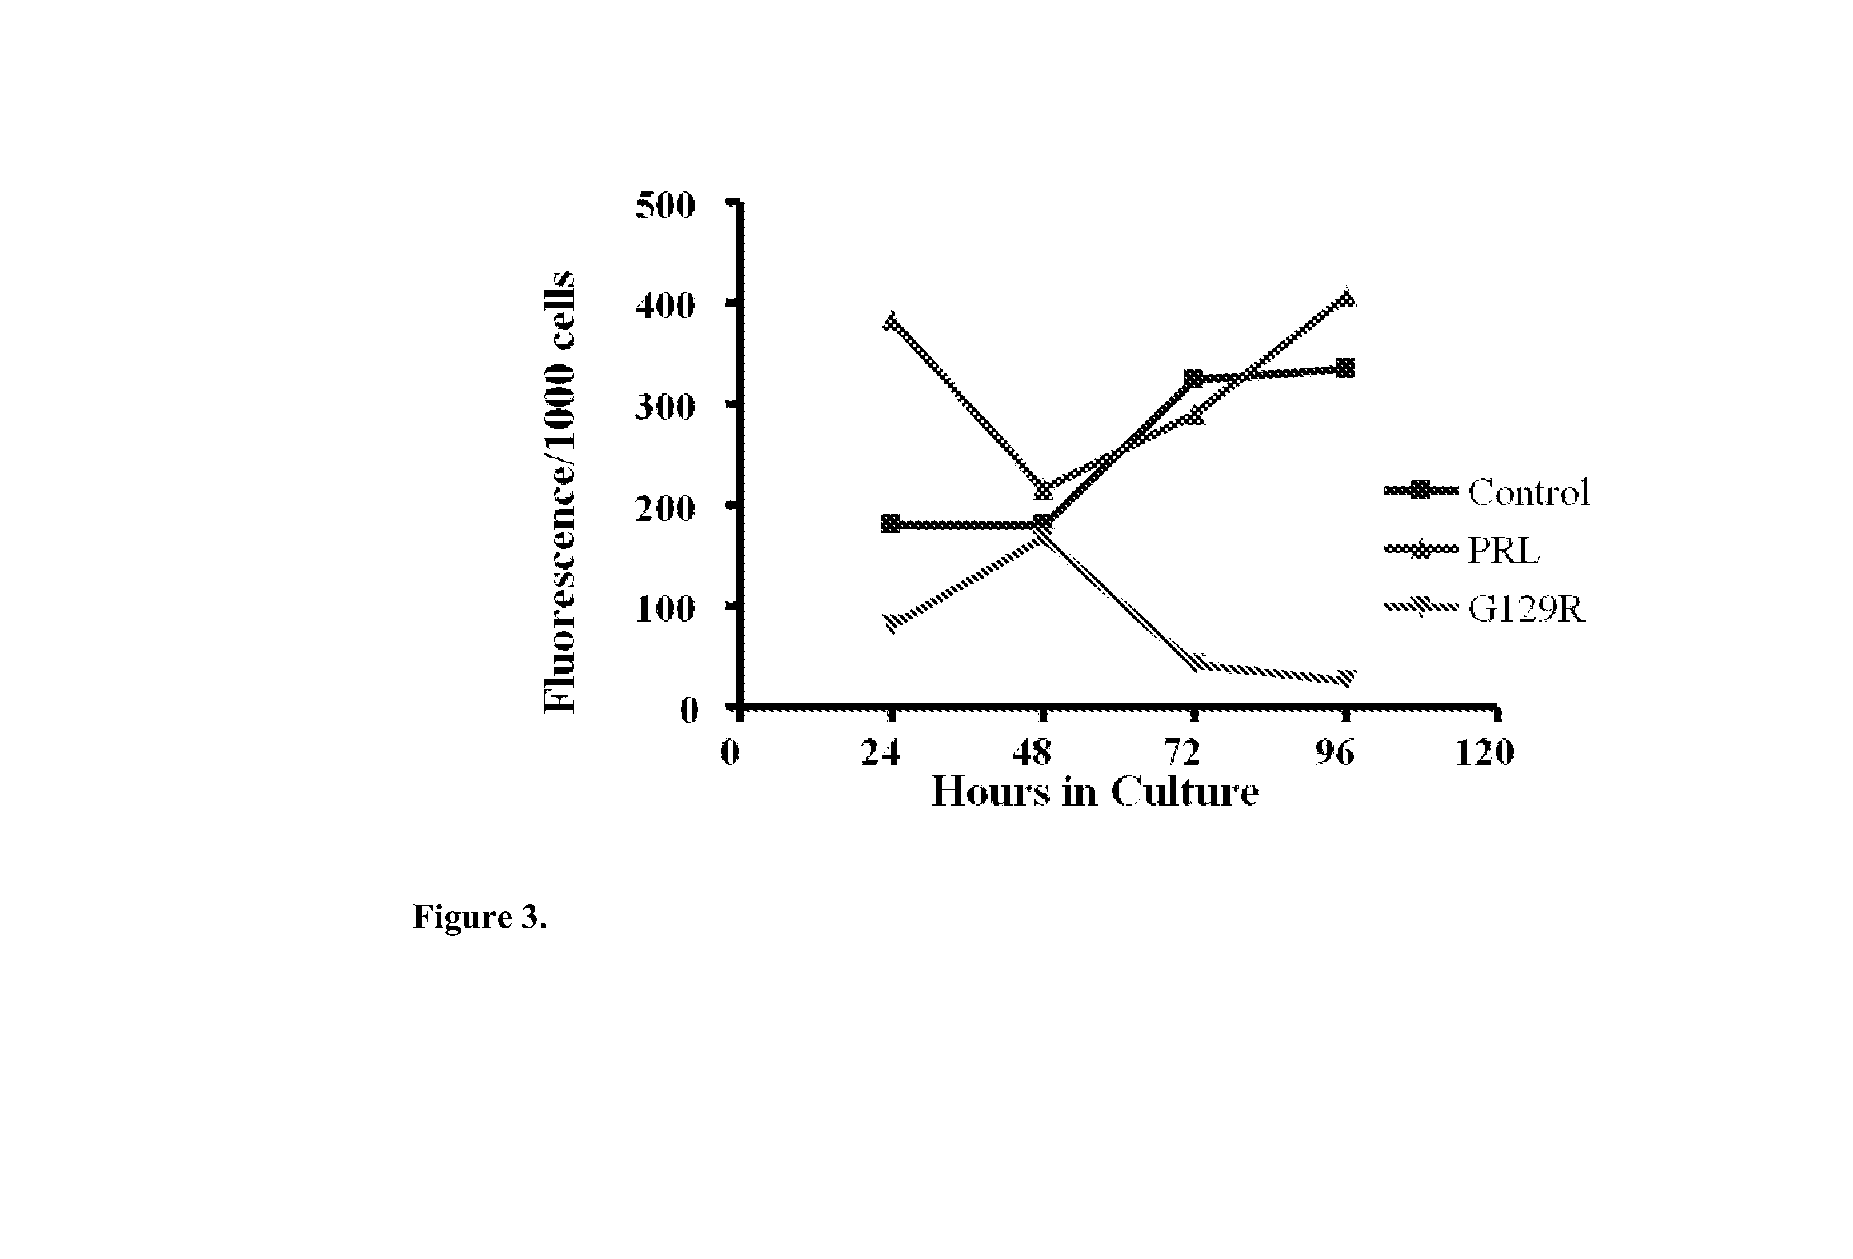 Use of Prolactin Receptor Antagonist and Chemotherapeutic Drug for Treating Ovarian Cancer